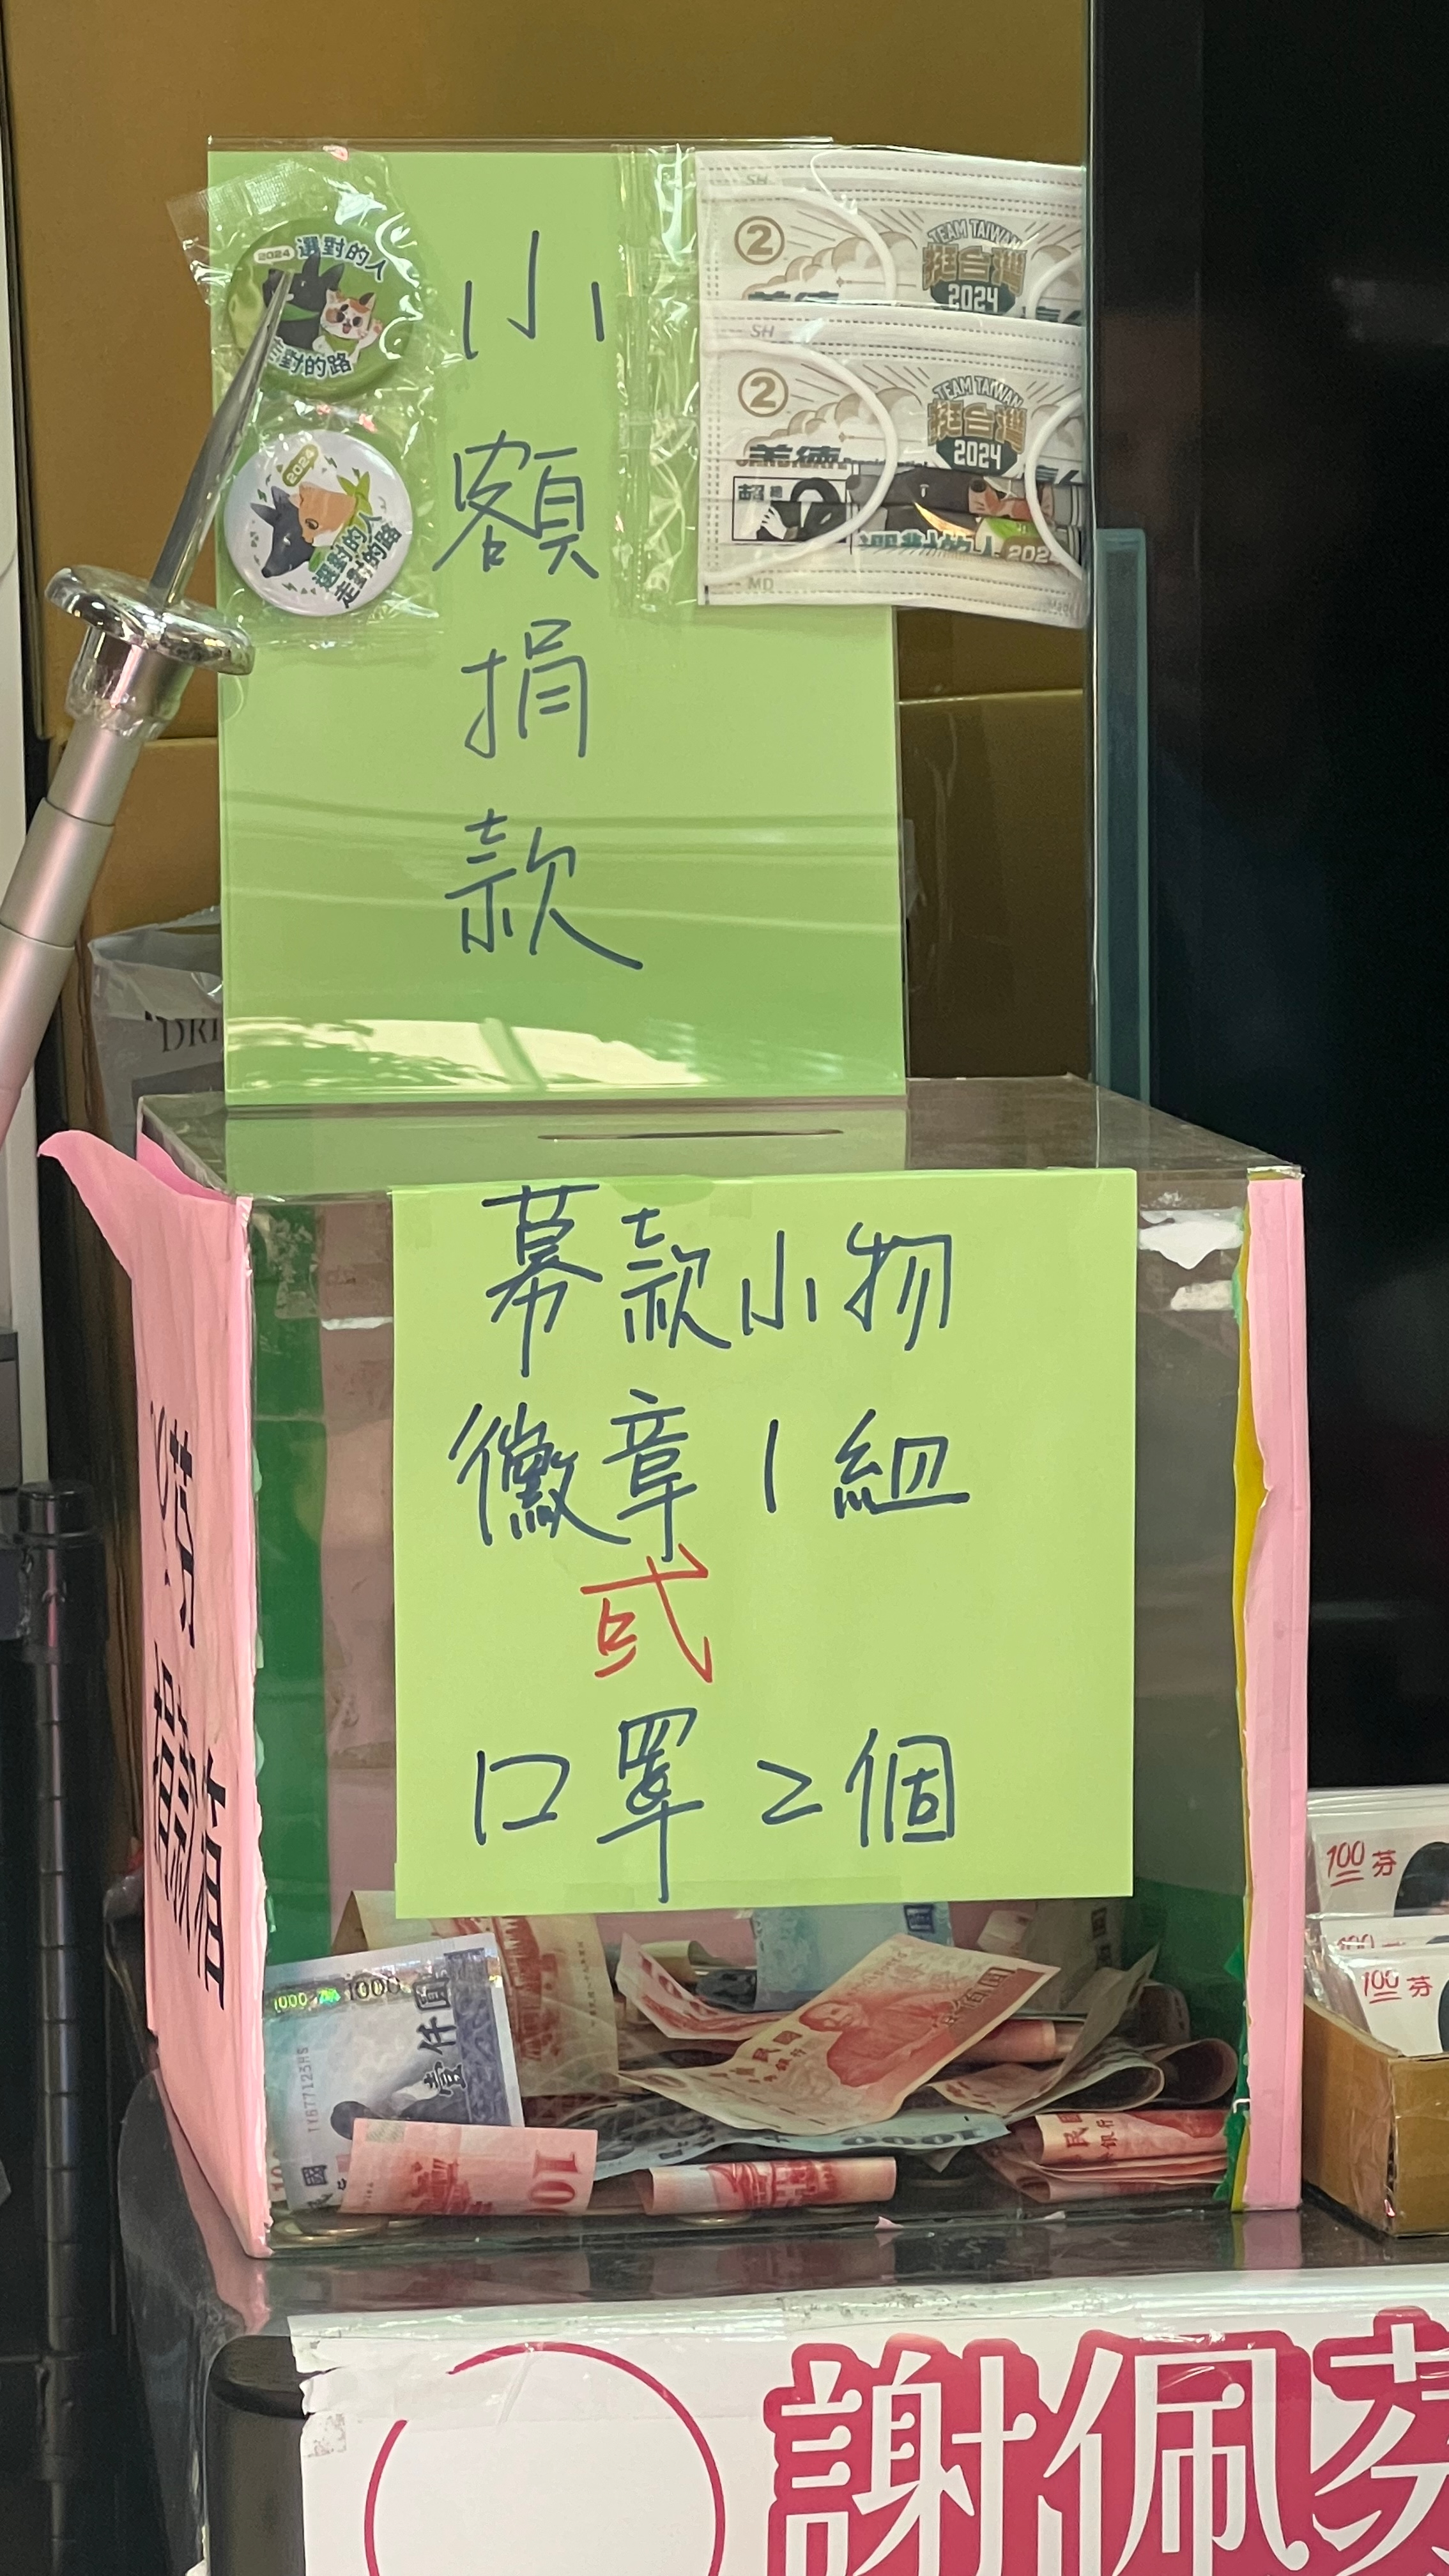 Donation box at the campaign office of candidate Peifen Hsieh in the Da'an district of Taipei